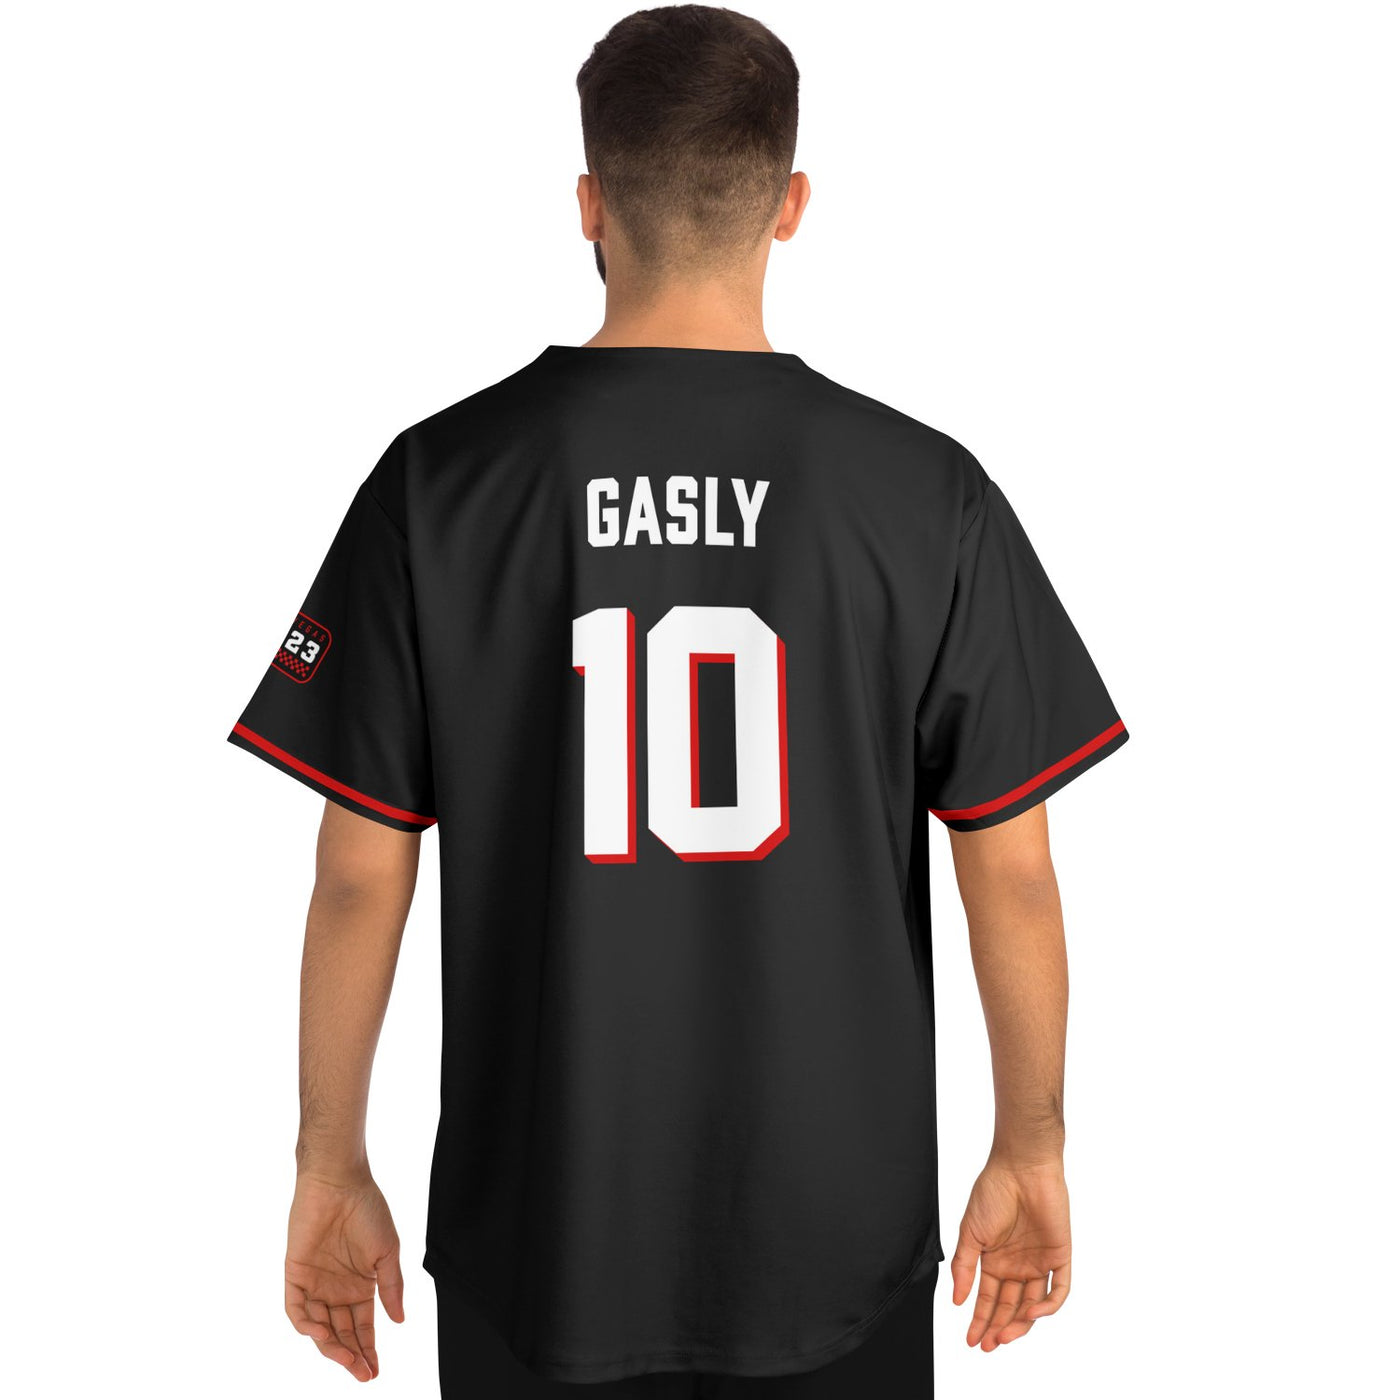 Gasly - Lucky Dice Jersey (Clearance) - Furious Motorsport